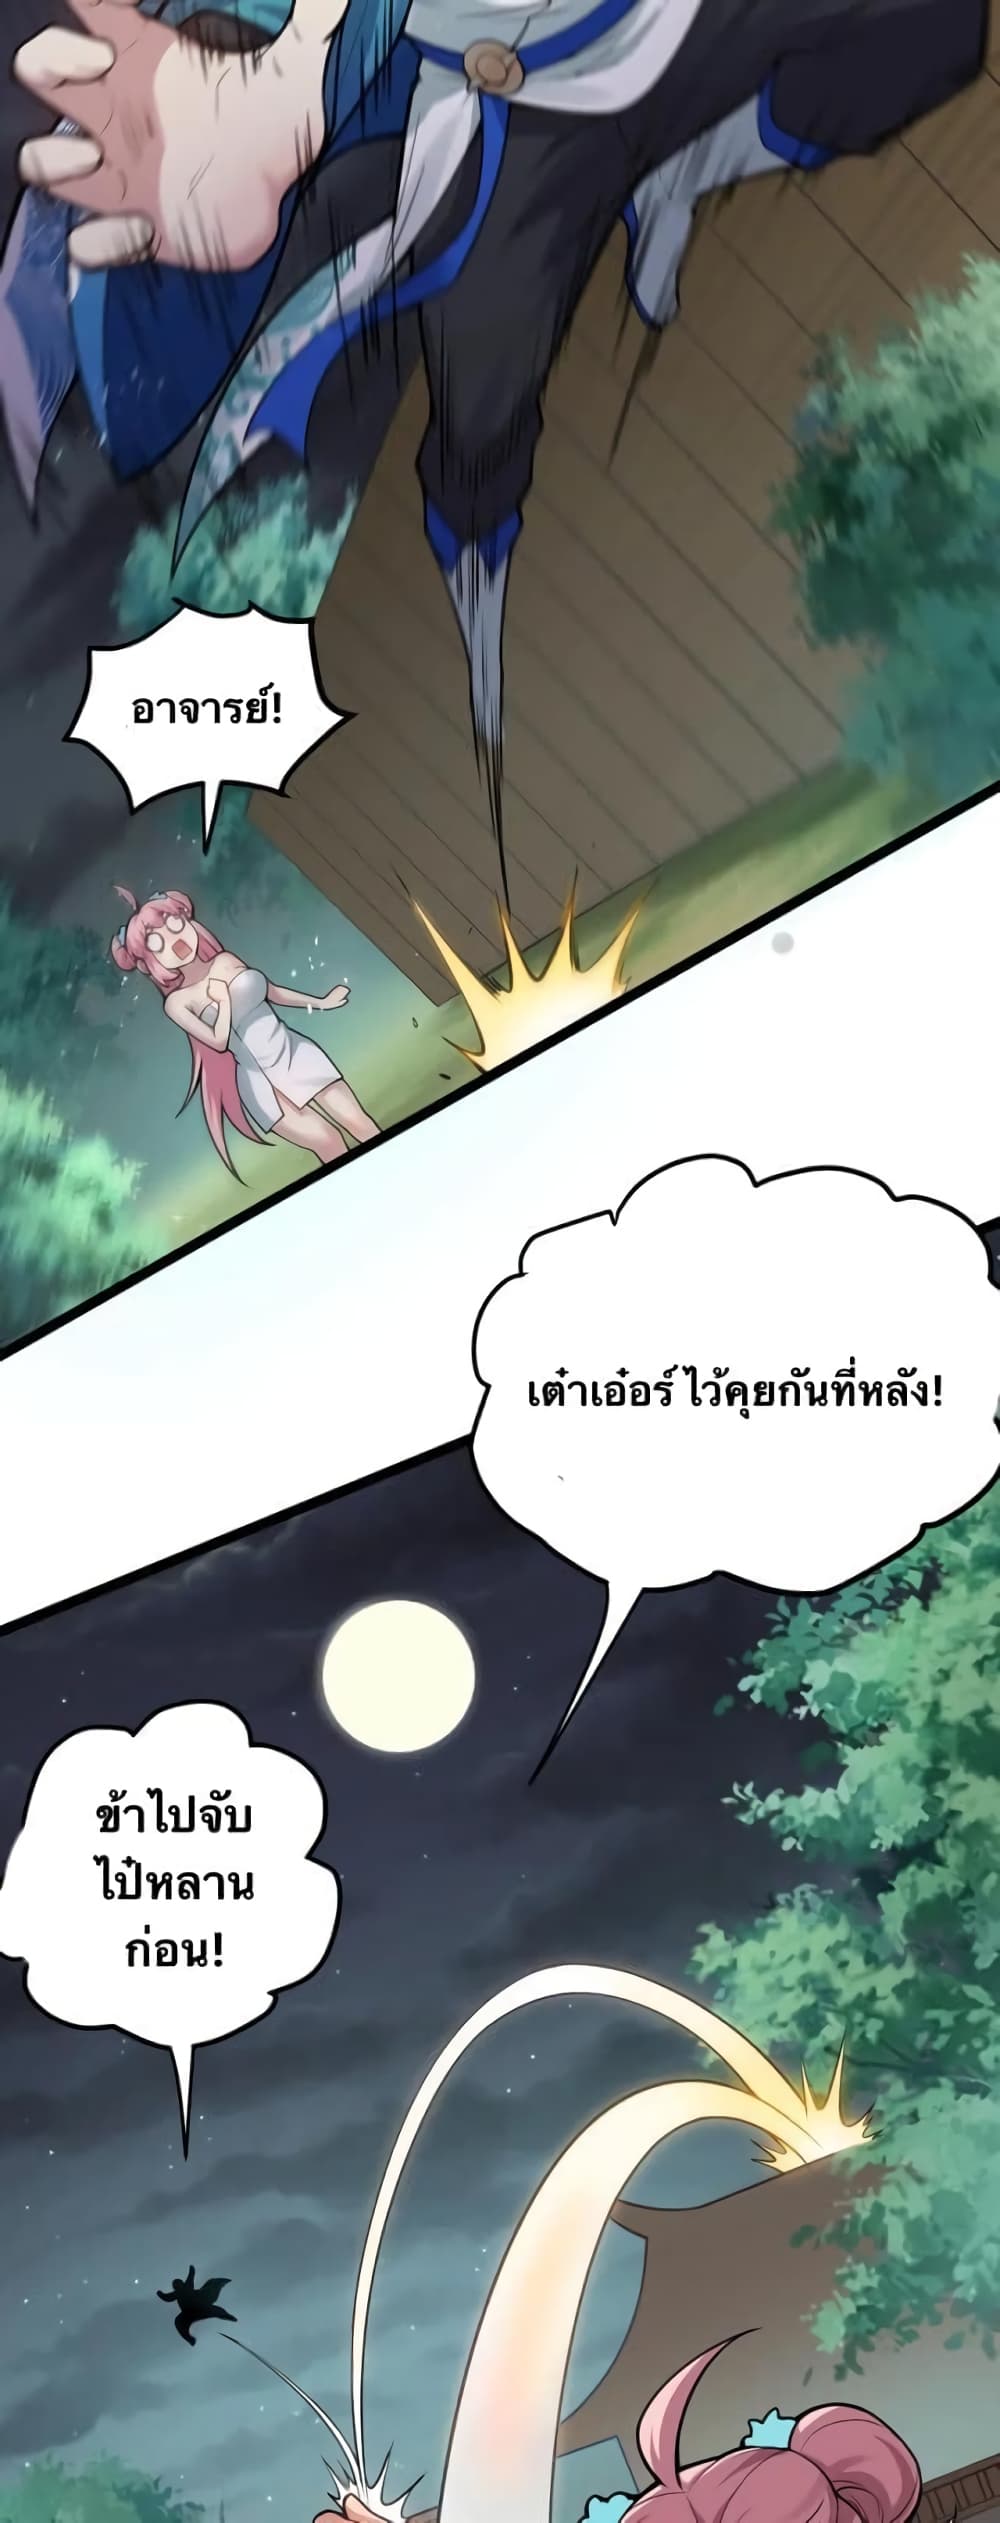 Godsian Masian from Another World ตอนที่ 94 (6)